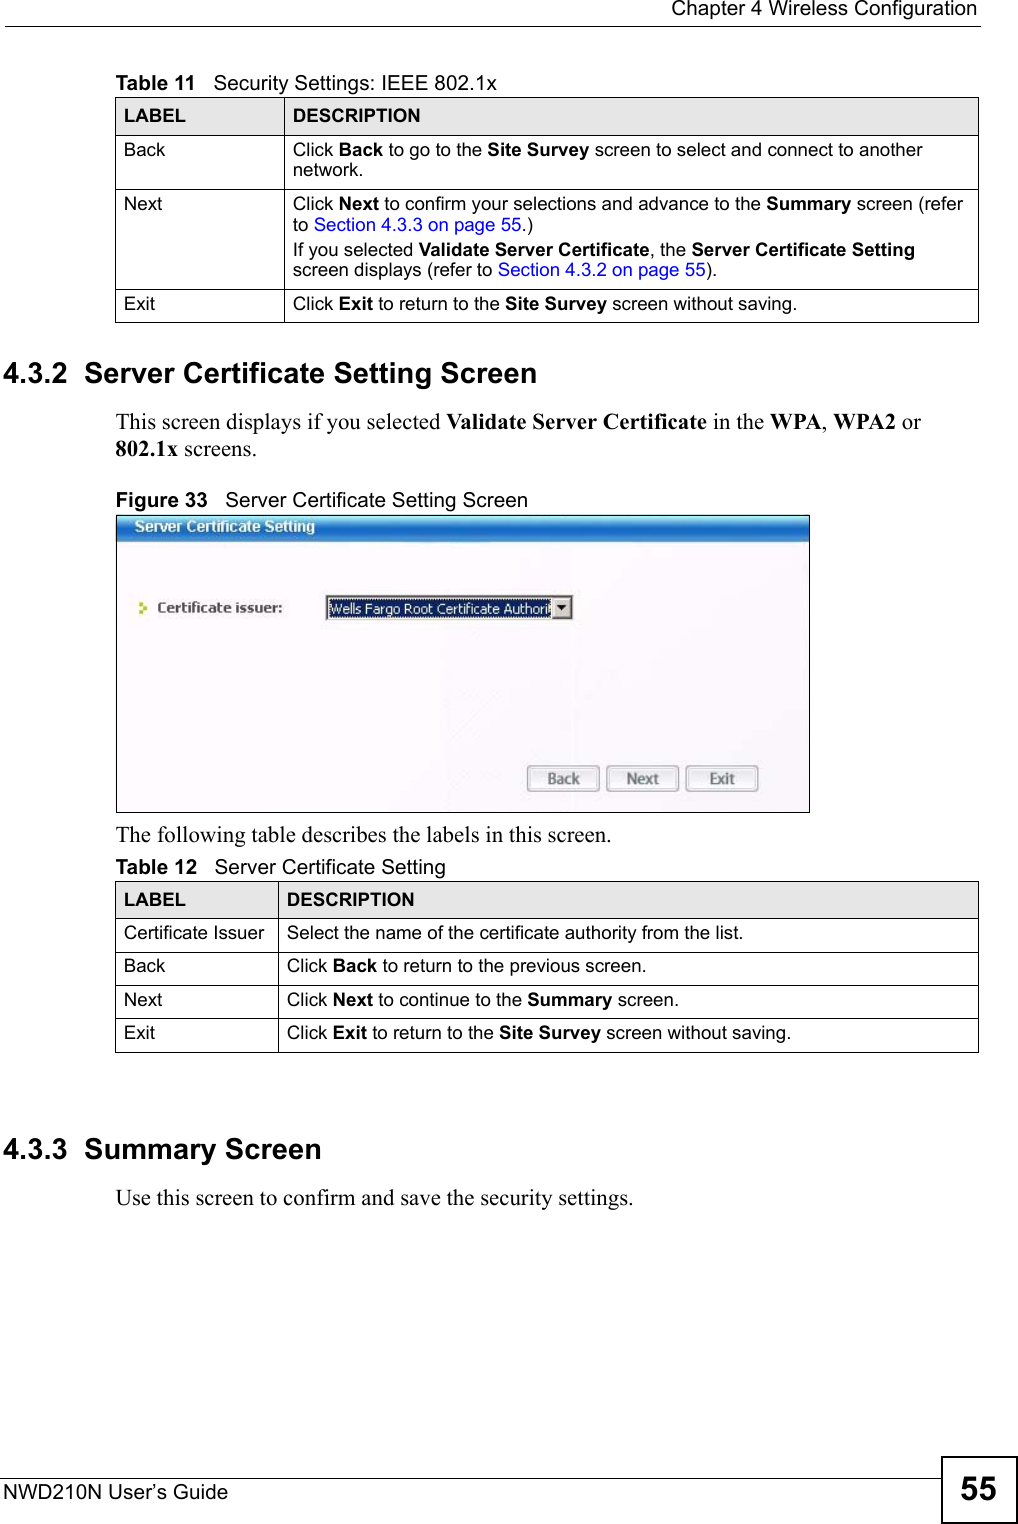  Chapter 4 Wireless ConfigurationNWD210N User’s Guide 554.3.2  Server Certificate Setting ScreenThis screen displays if you selected Validate Server Certificate in the WPA, WPA2 or 802.1x screens.Figure 33   Server Certificate Setting ScreenThe following table describes the labels in this screen.4.3.3  Summary ScreenUse this screen to confirm and save the security settings.Back Click Back to go to the Site Survey screen to select and connect to another network.Next Click Next to confirm your selections and advance to the Summary screen (refer to Section 4.3.3 on page 55.) If you selected Validate Server Certificate, the Server Certificate Setting screen displays (refer to Section 4.3.2 on page 55).Exit Click Exit to return to the Site Survey screen without saving.Table 11   Security Settings: IEEE 802.1xLABEL DESCRIPTIONTable 12   Server Certificate SettingLABEL DESCRIPTIONCertificate Issuer Select the name of the certificate authority from the list.Back Click Back to return to the previous screen.Next Click Next to continue to the Summary screen.Exit Click Exit to return to the Site Survey screen without saving.